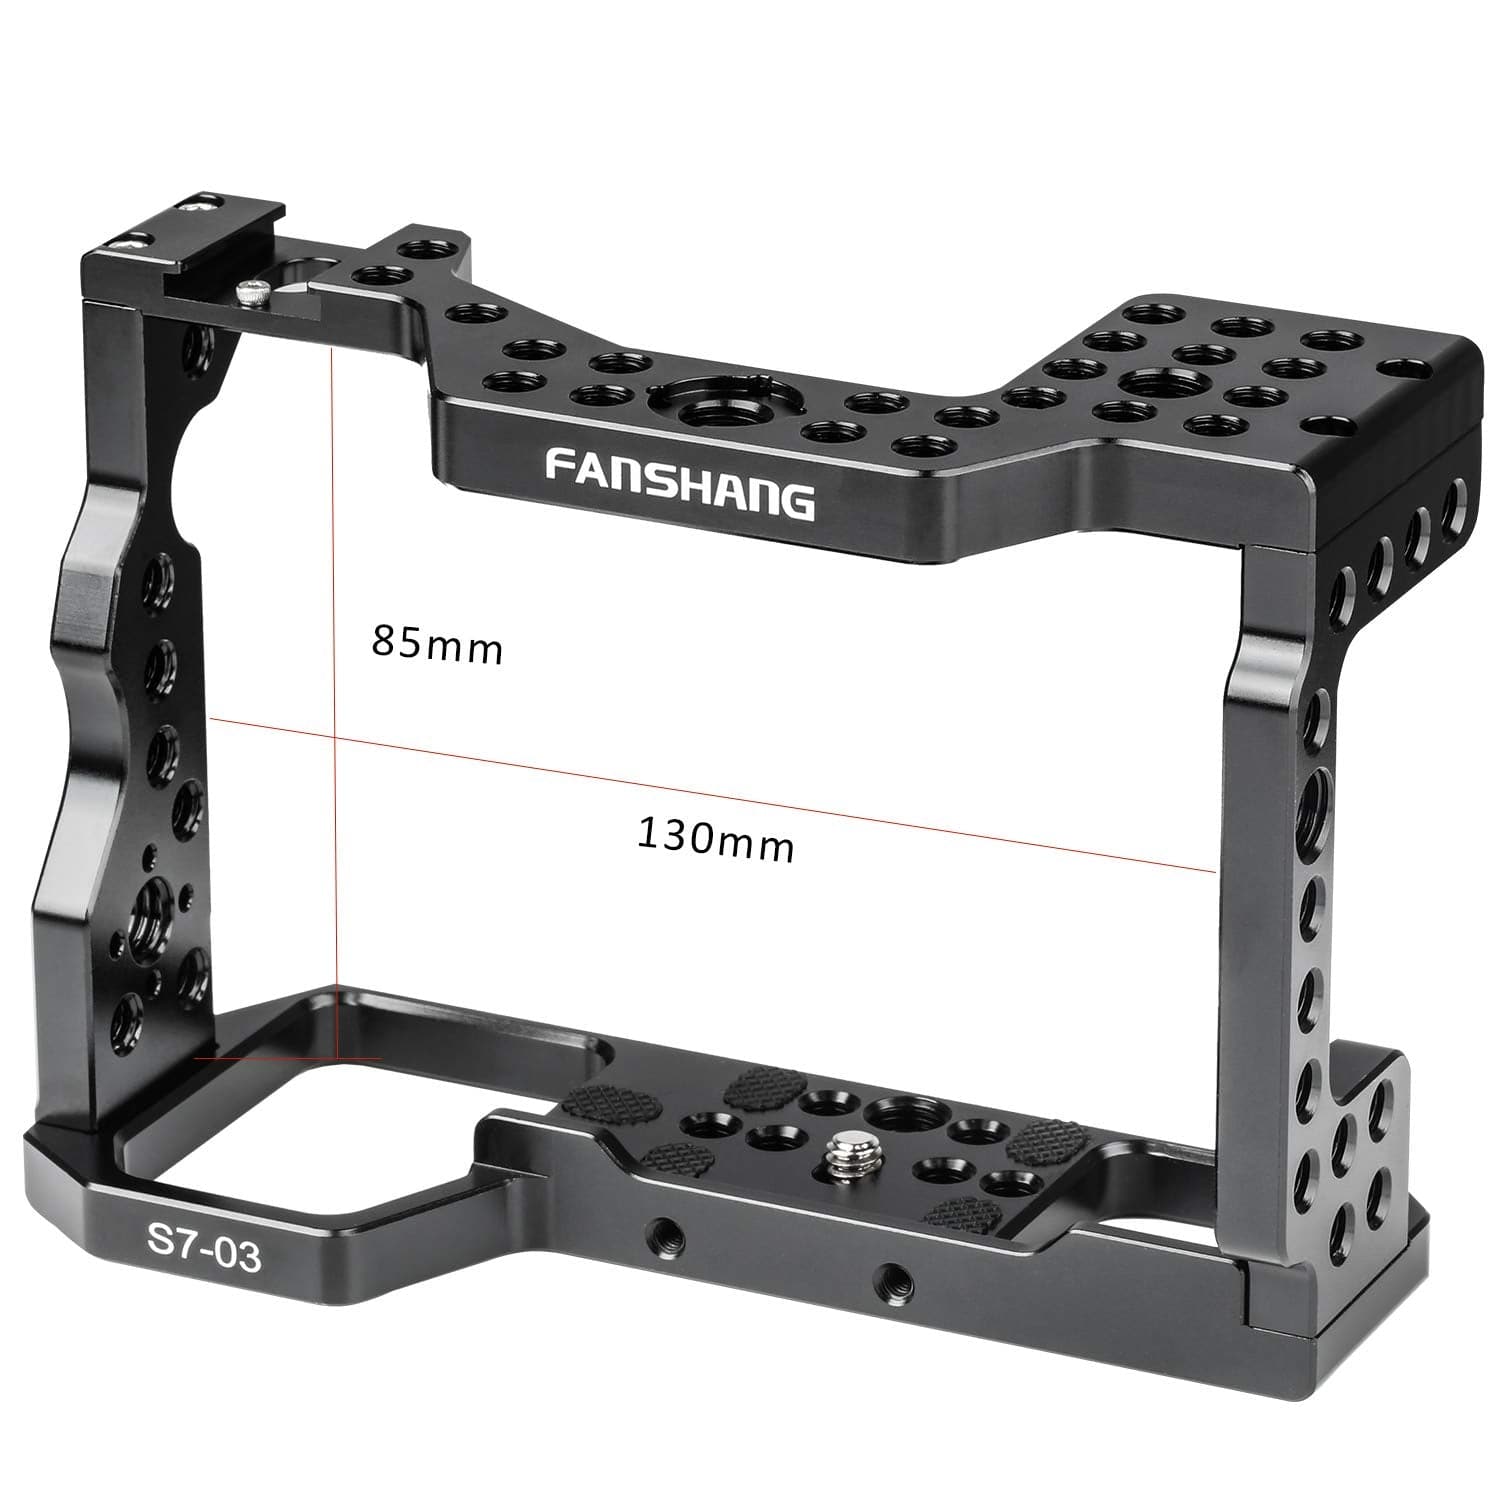 Viltrox FANSHANG Aluminum Camera Cage Film Movie Making Kit Rig Stabilizer+Top Handle Grip for Sony